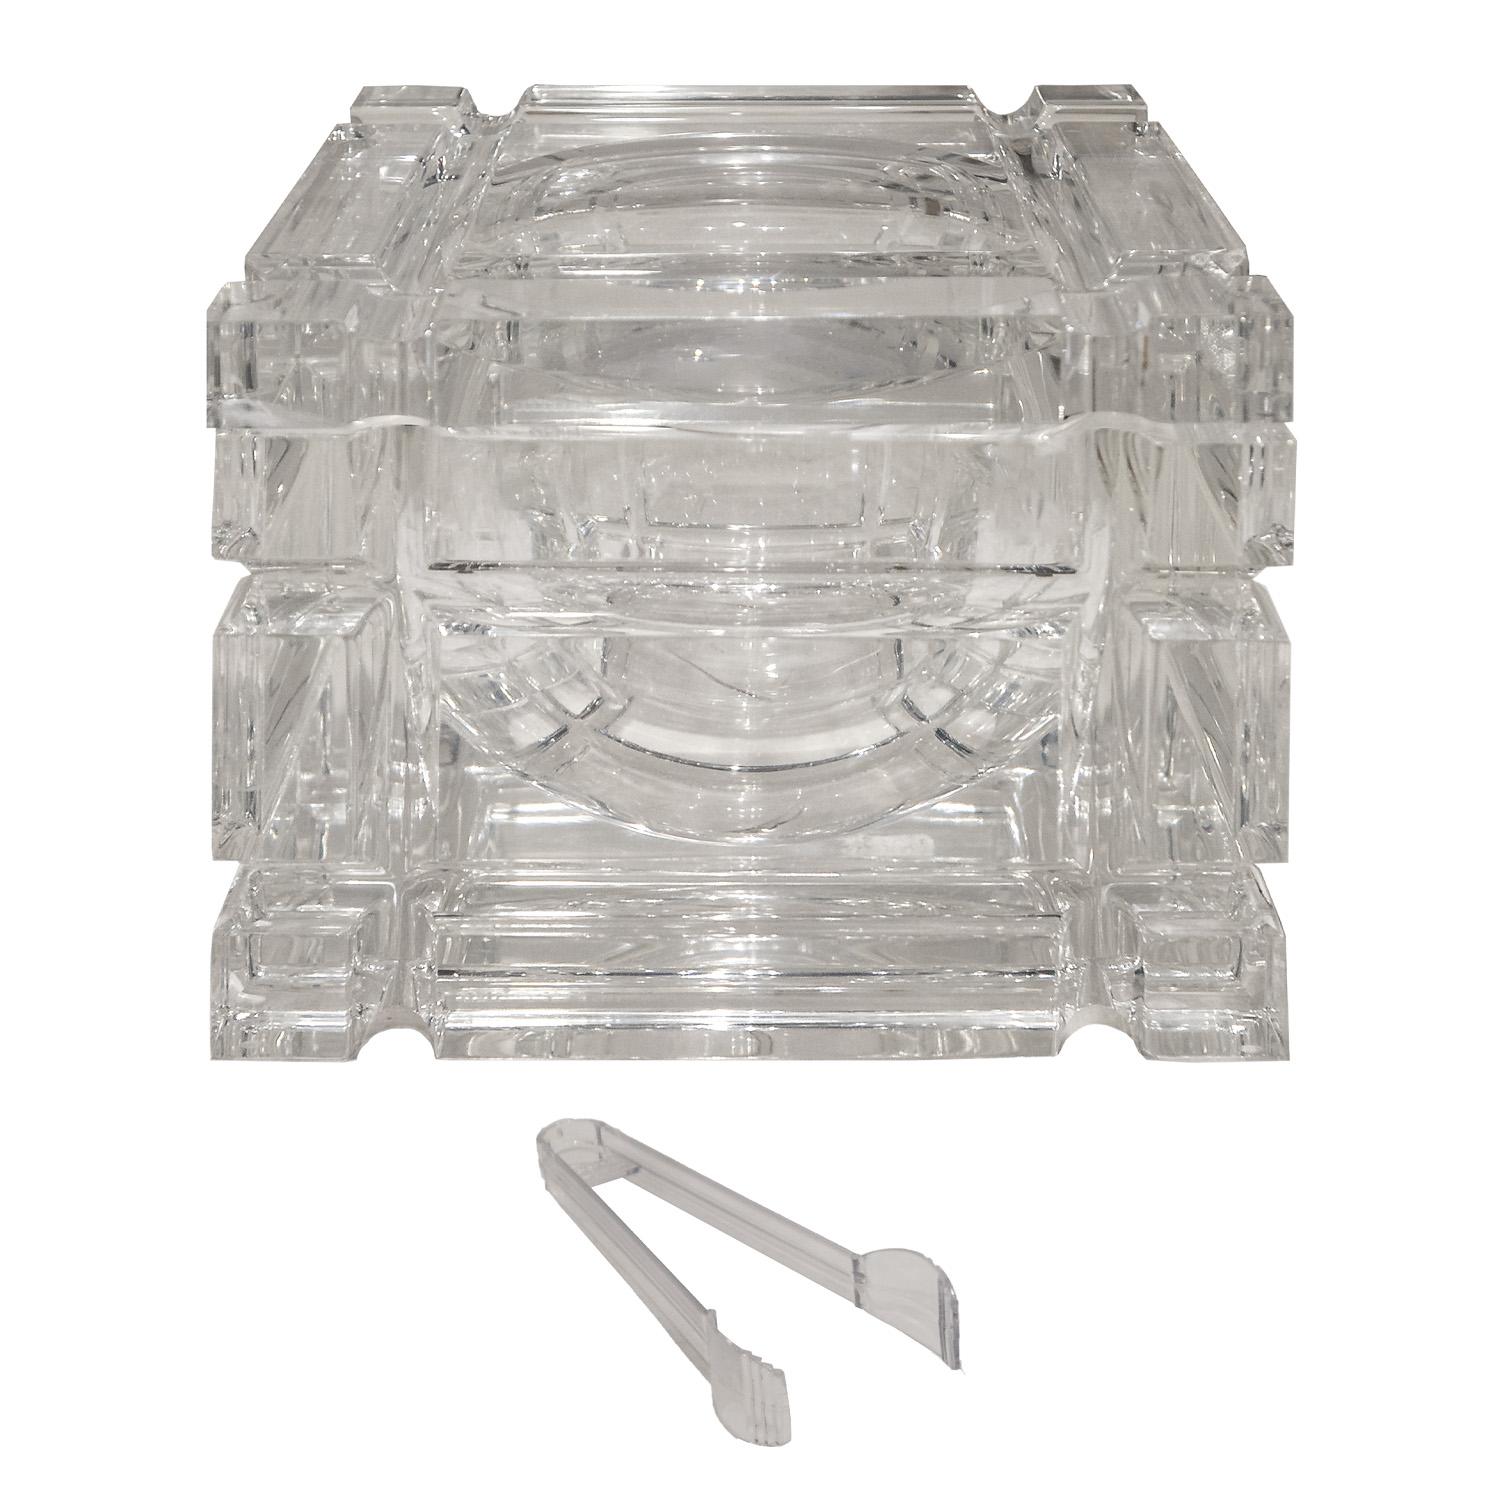 Beautifully crafted and stunning ice bucket in solid molded and polished lucite on a swivel hinge with original ice tongs, Italian 1970s.  This is one of the best lucite ice buckets we have seen.  Super high quality.